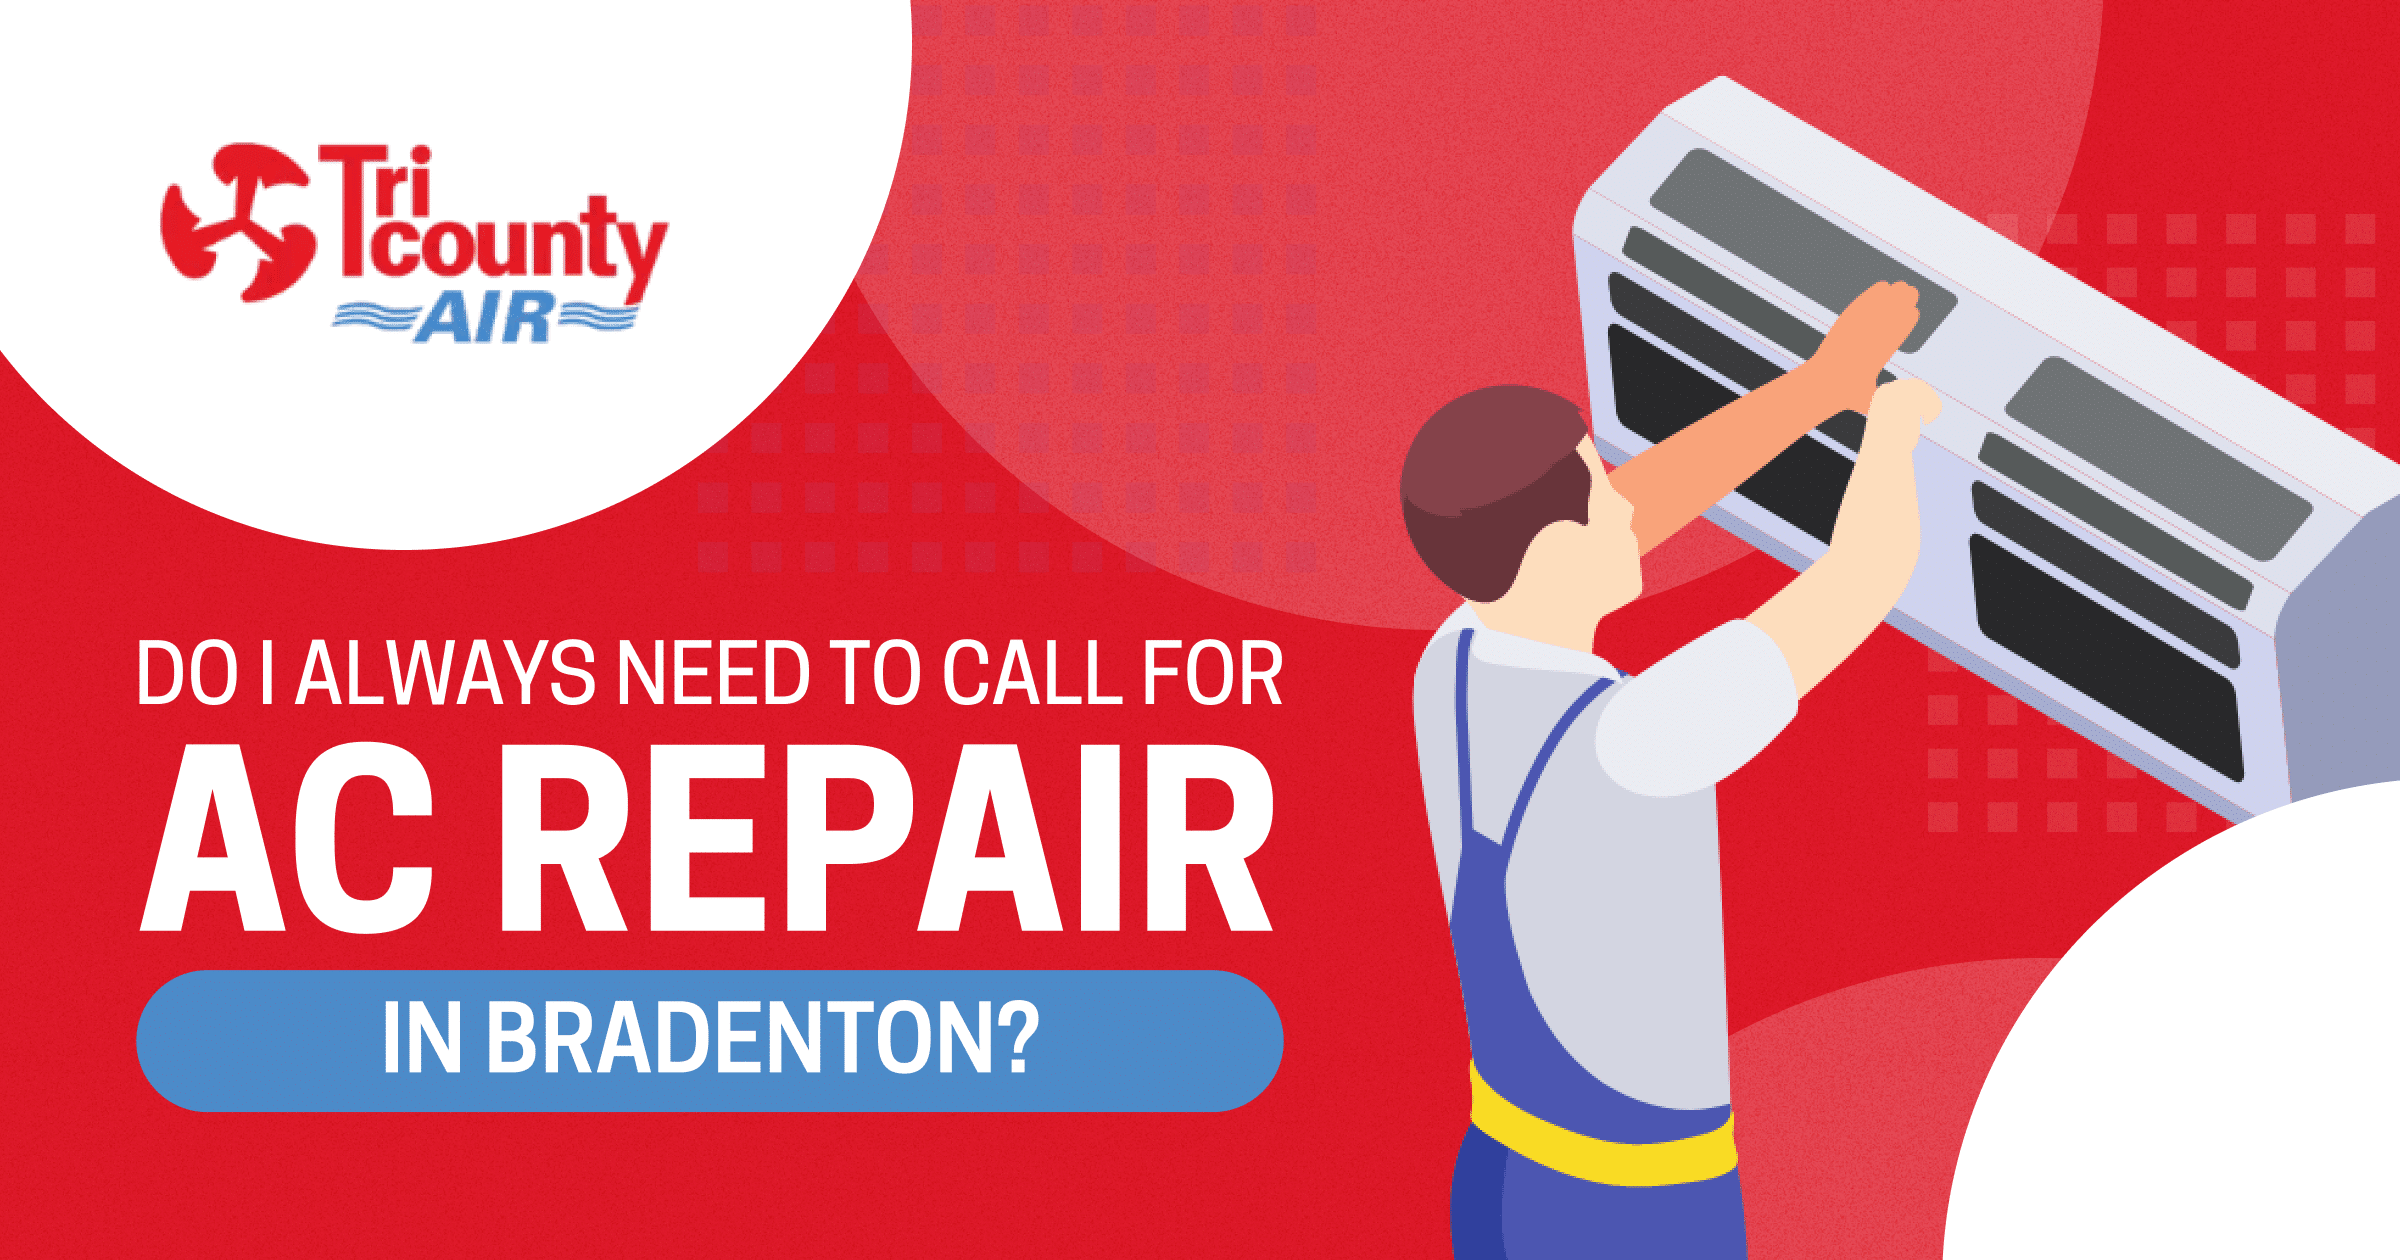 Do I Always Need to Call for AC Repair in Bradenton?